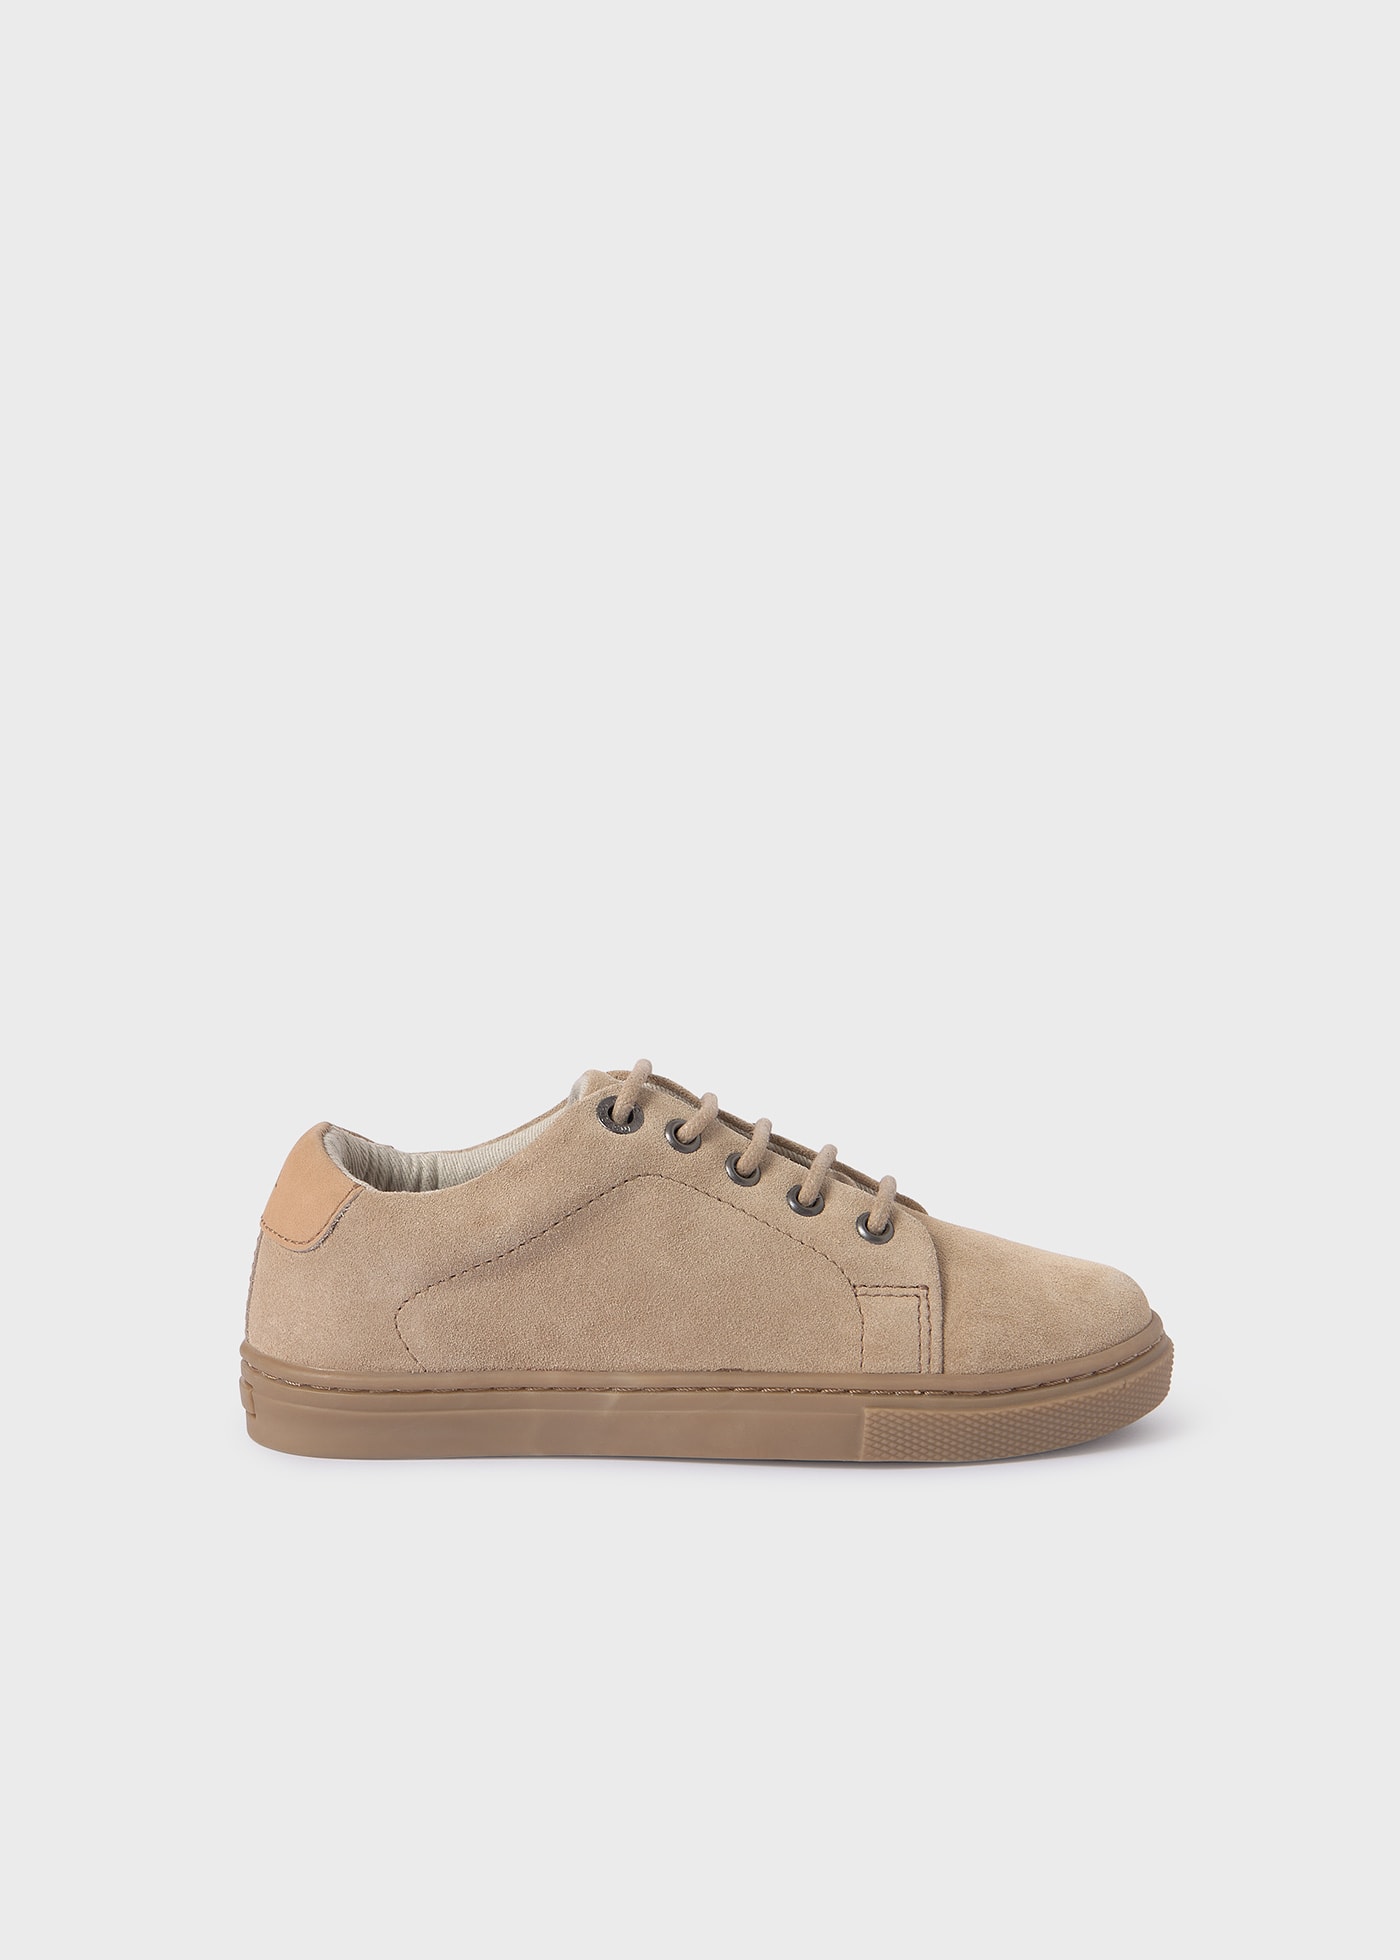 Boys casual sneakers sustainable leather